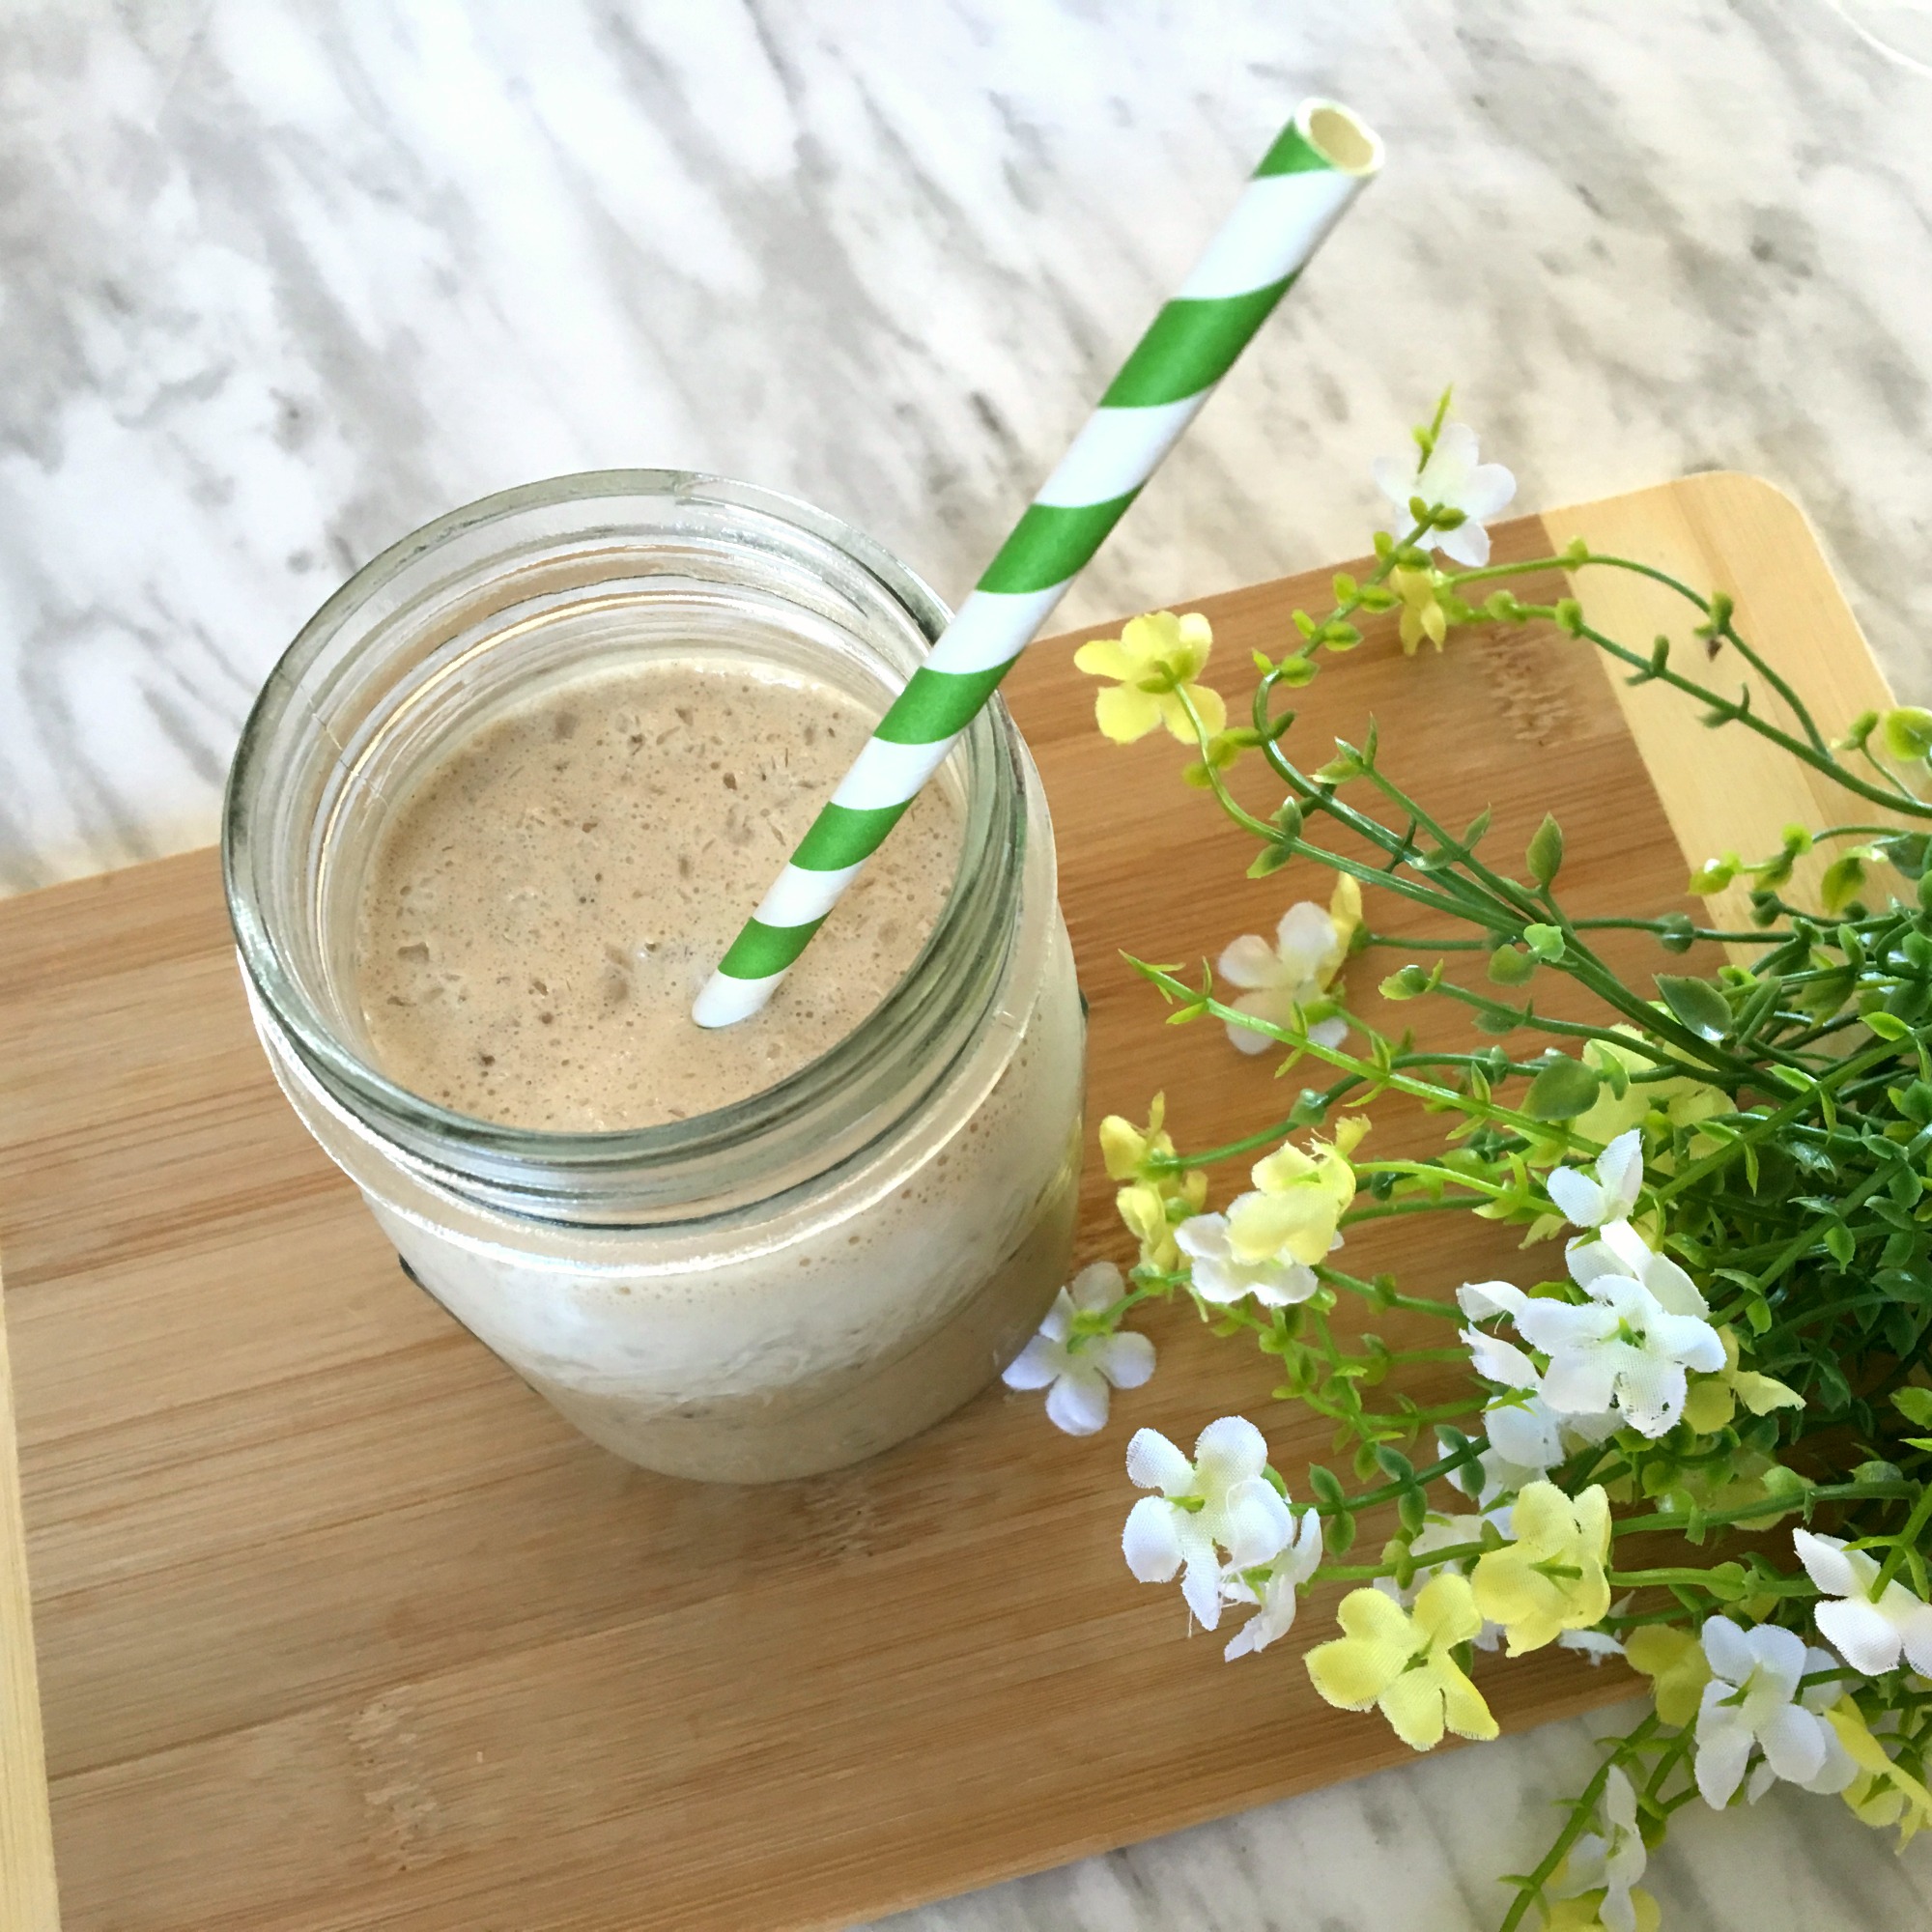 Delicious Iced Coffee Recipe With Only 3 Ingredients!